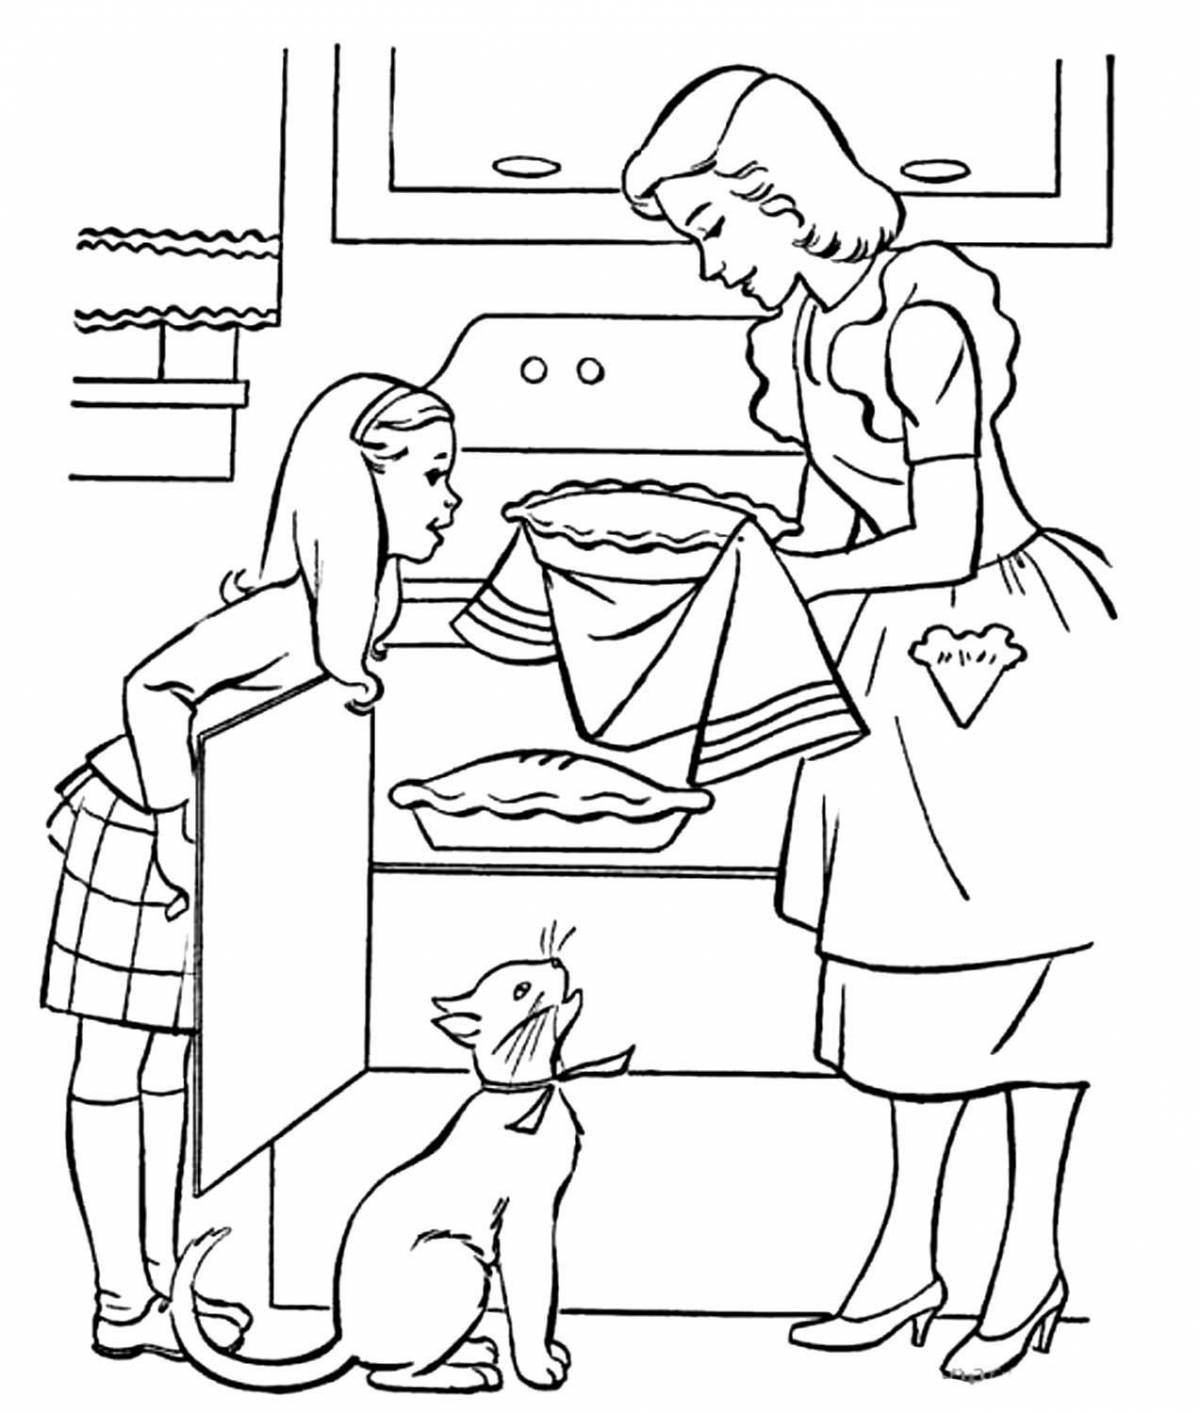 Glowing mother coloring page